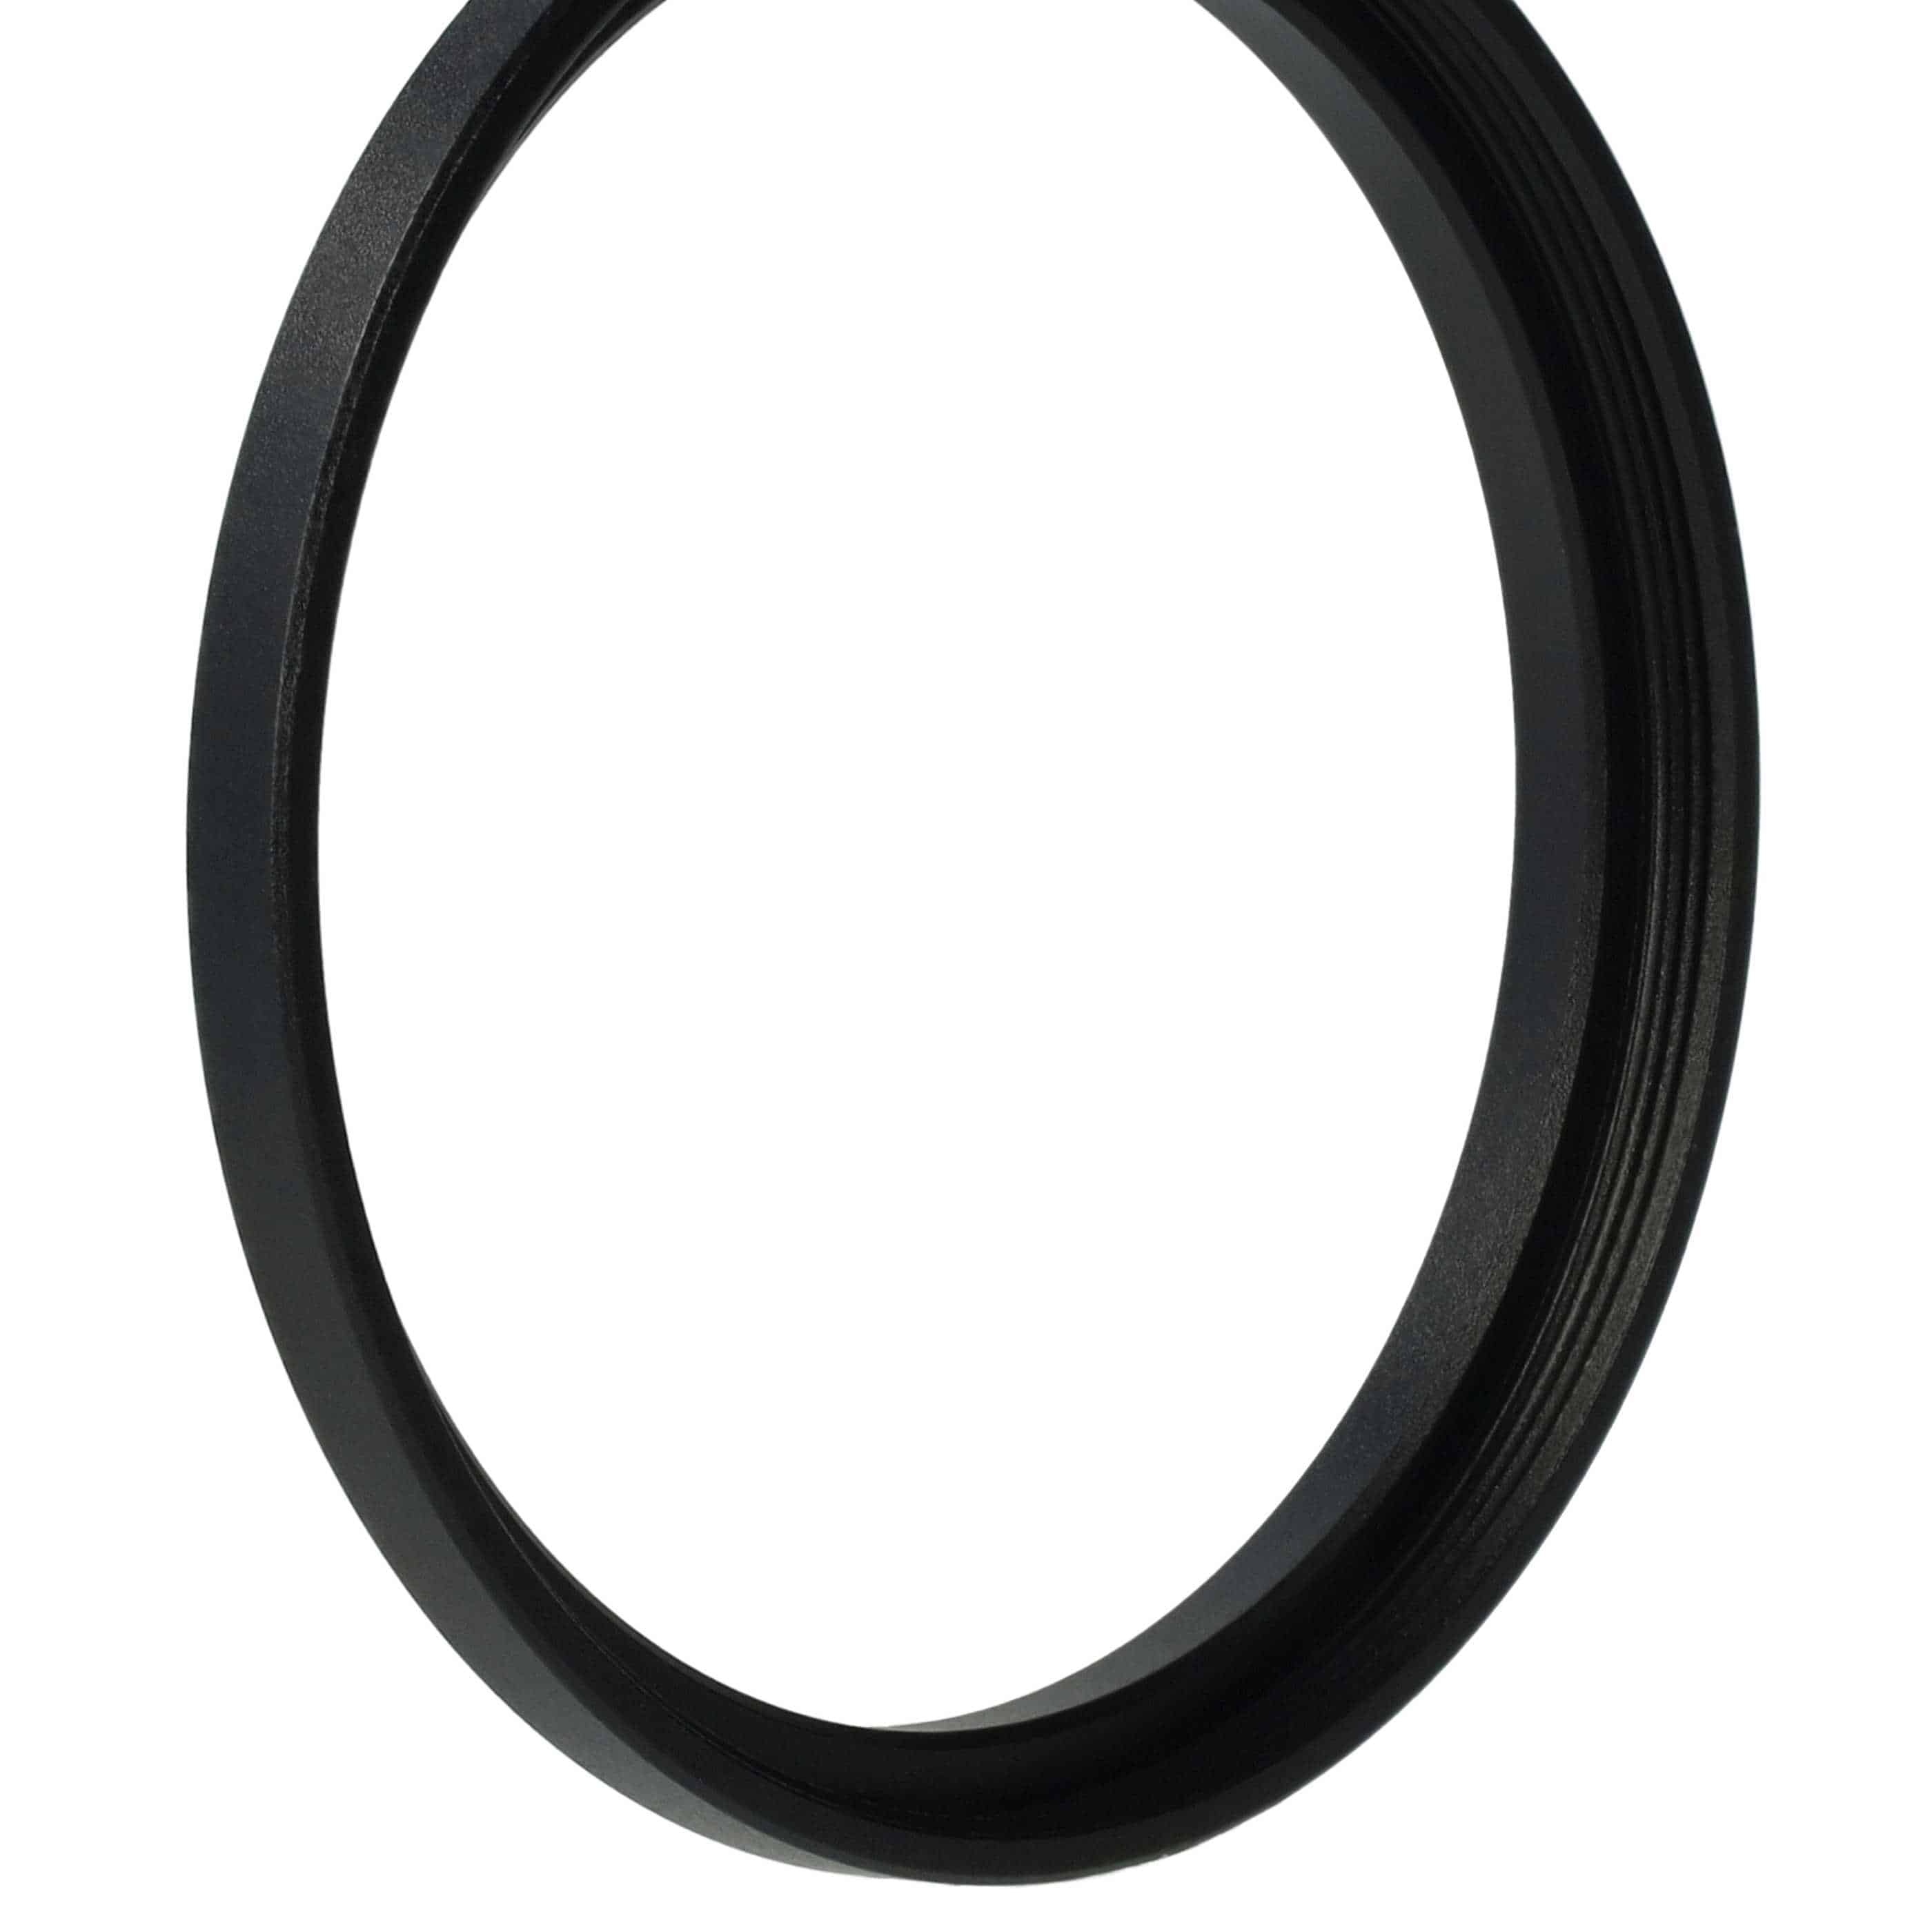 Step-Up Ring Adapter of 52 mm to 54 mmfor various Camera Lens - Filter Adapter